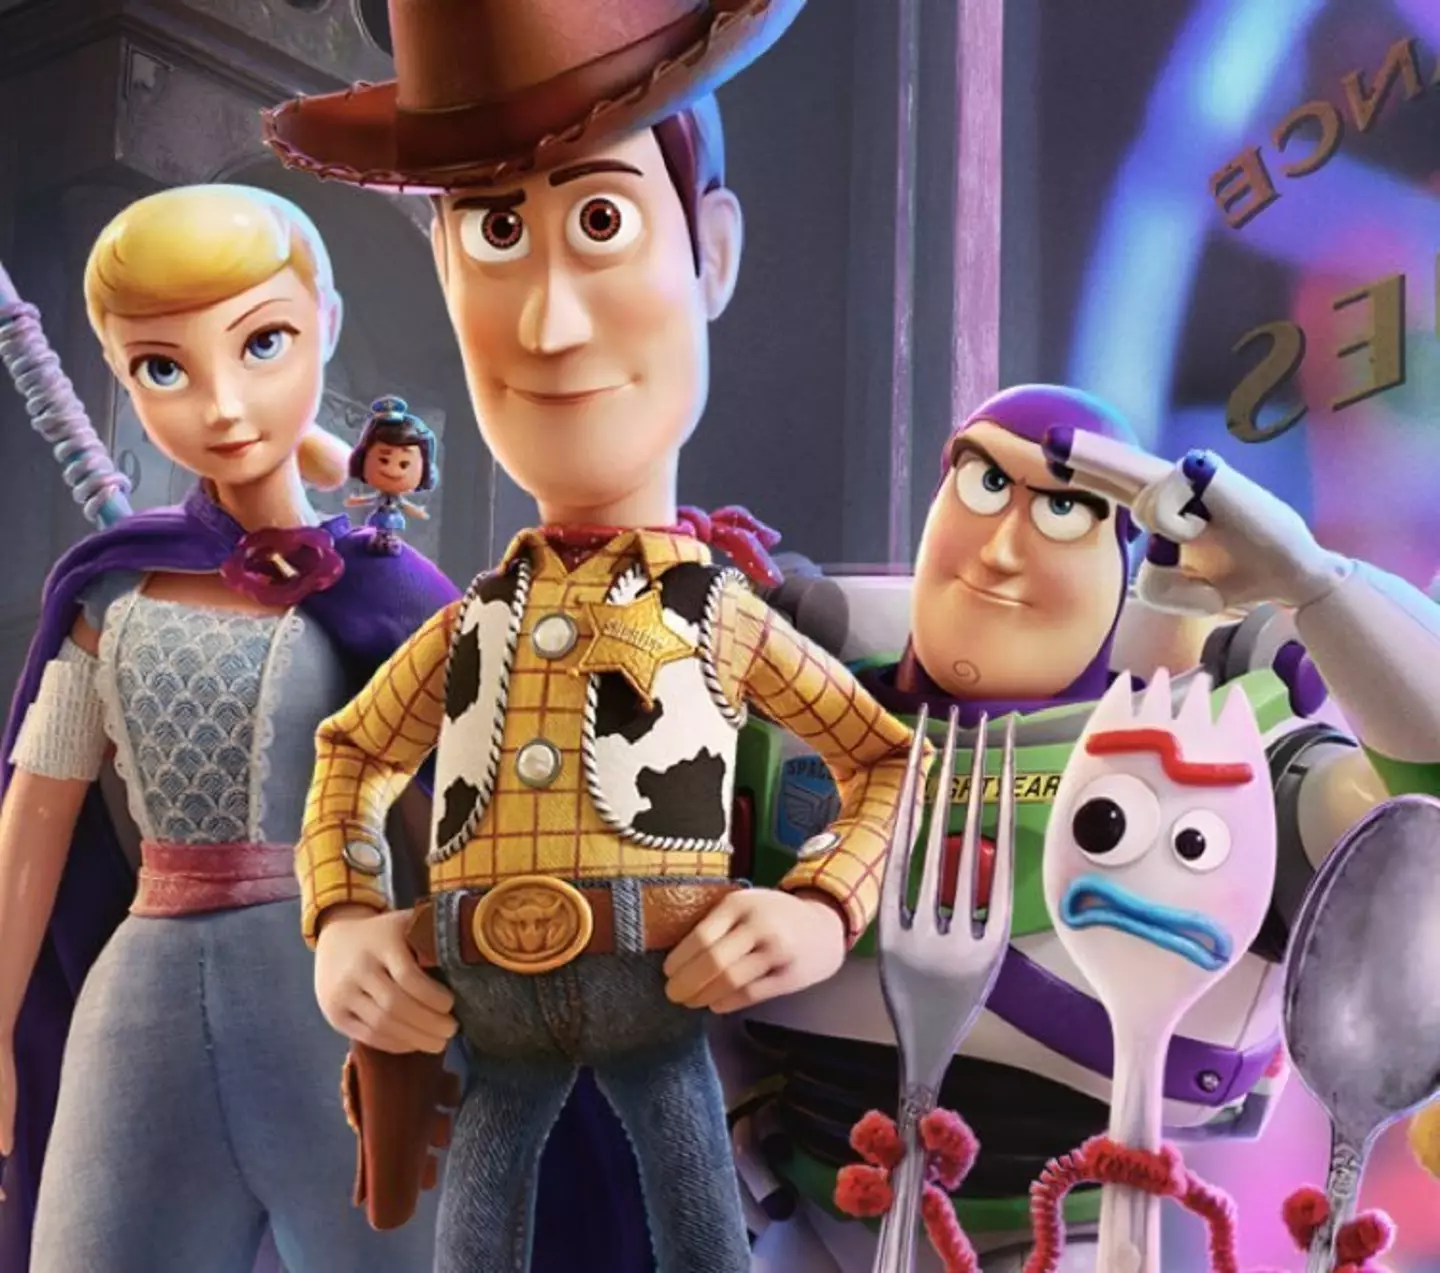 Toy Story 4 is back.